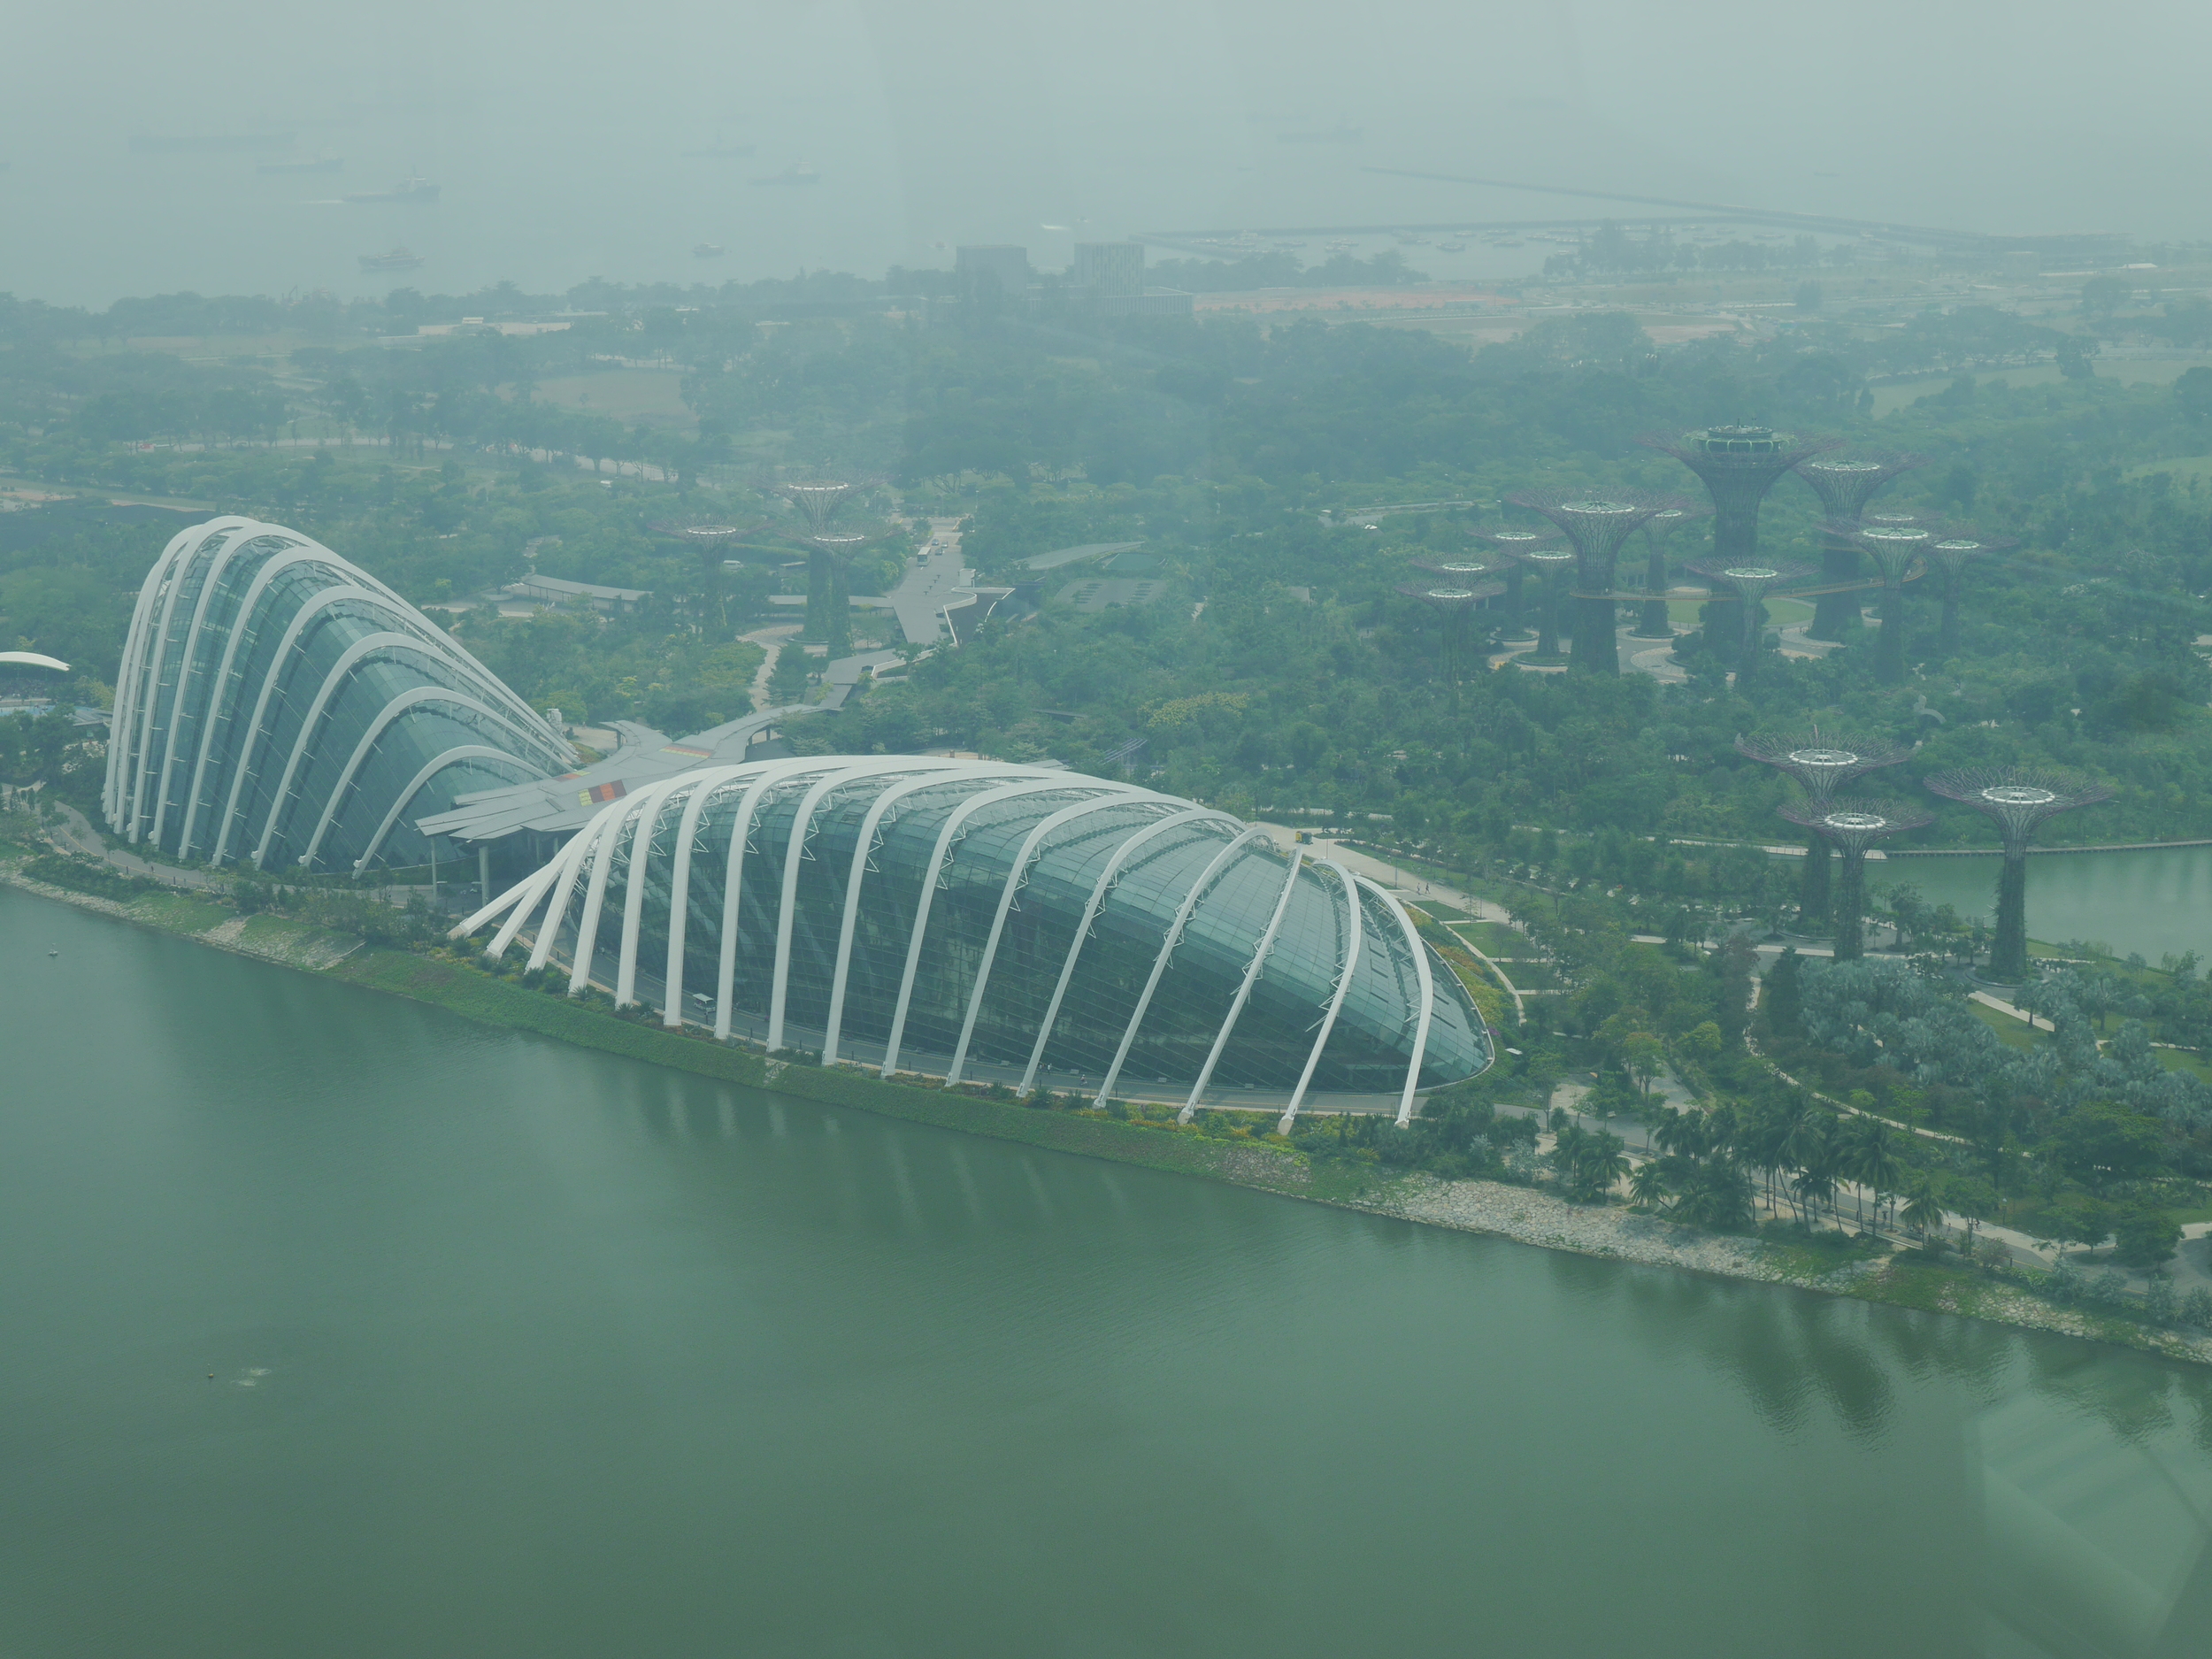  The Gardens by the Bay from above. Cloud Forest dome on the left, Flower Dome in the middle, and the Supertree Grove towards the back right. 